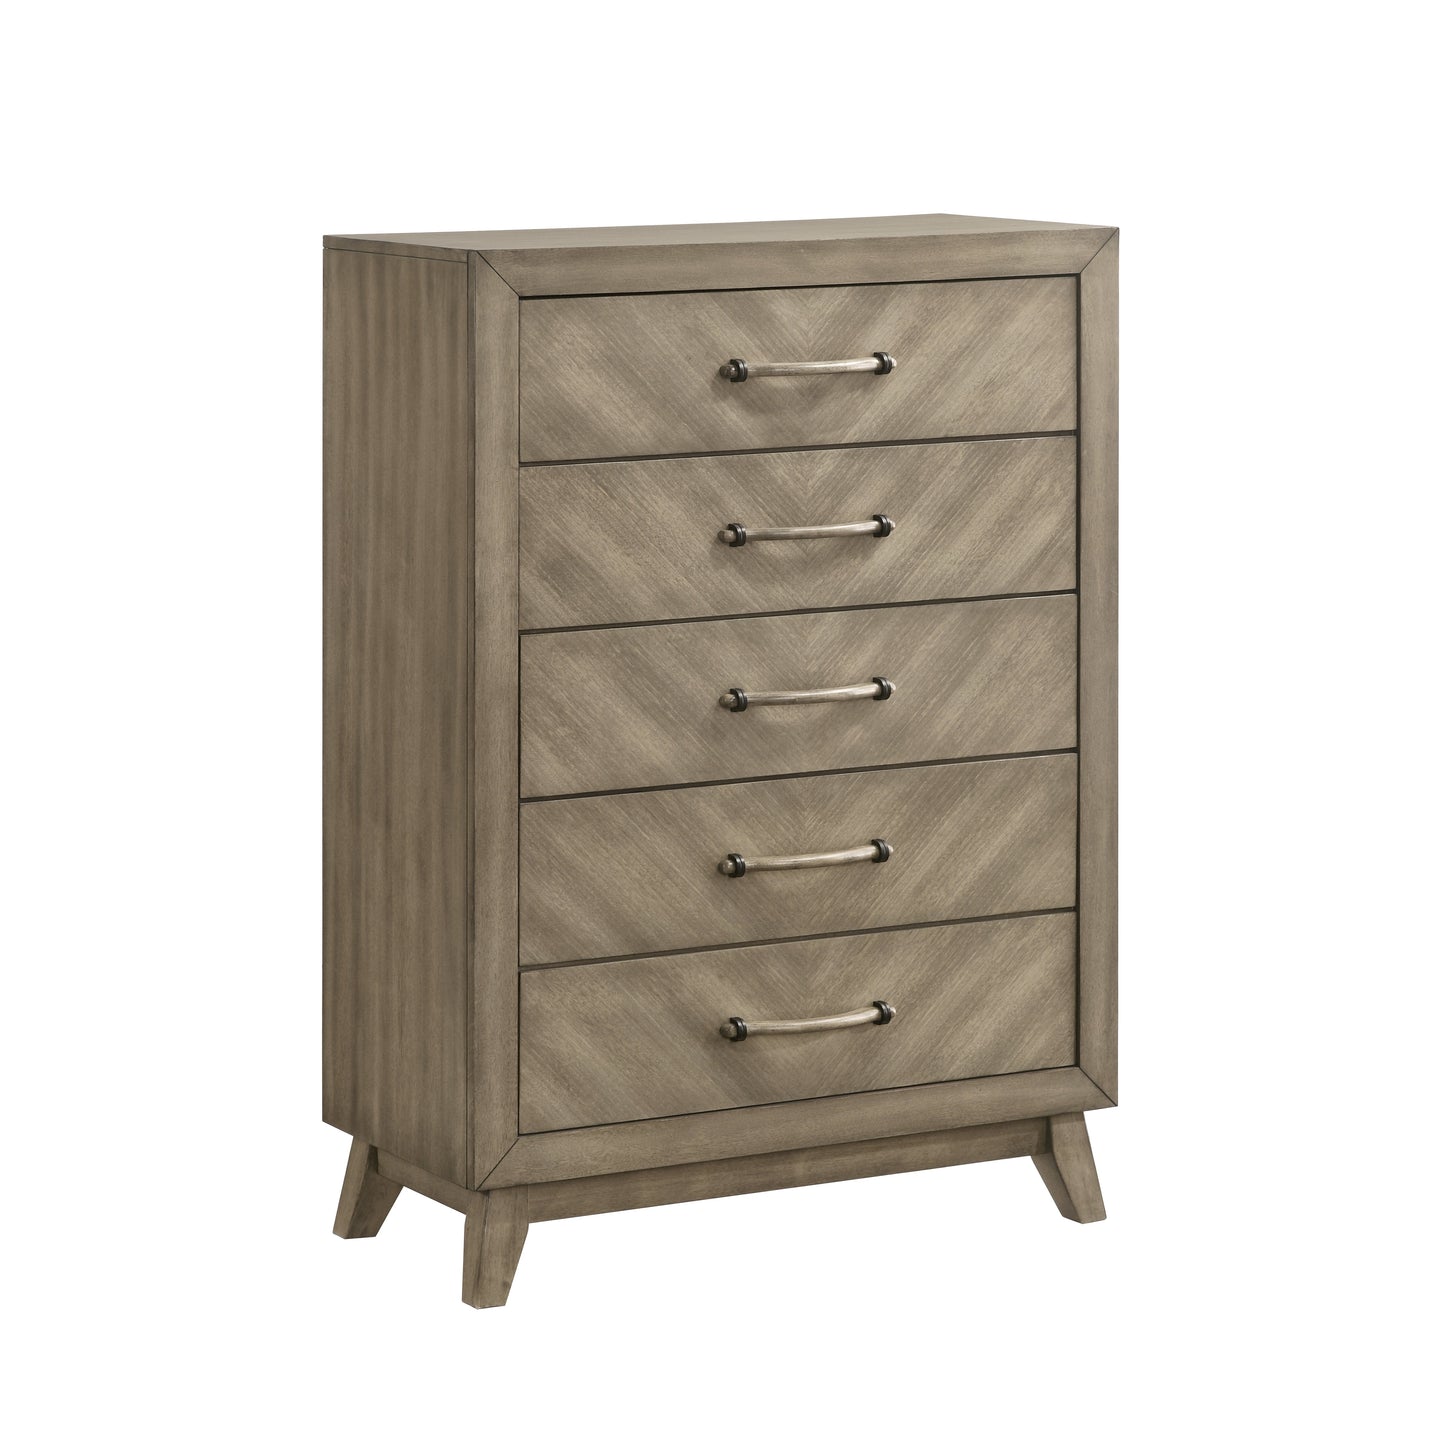 Roundhill Furniture Arena Contemporary 5-Drawer Chest in Antique Gray